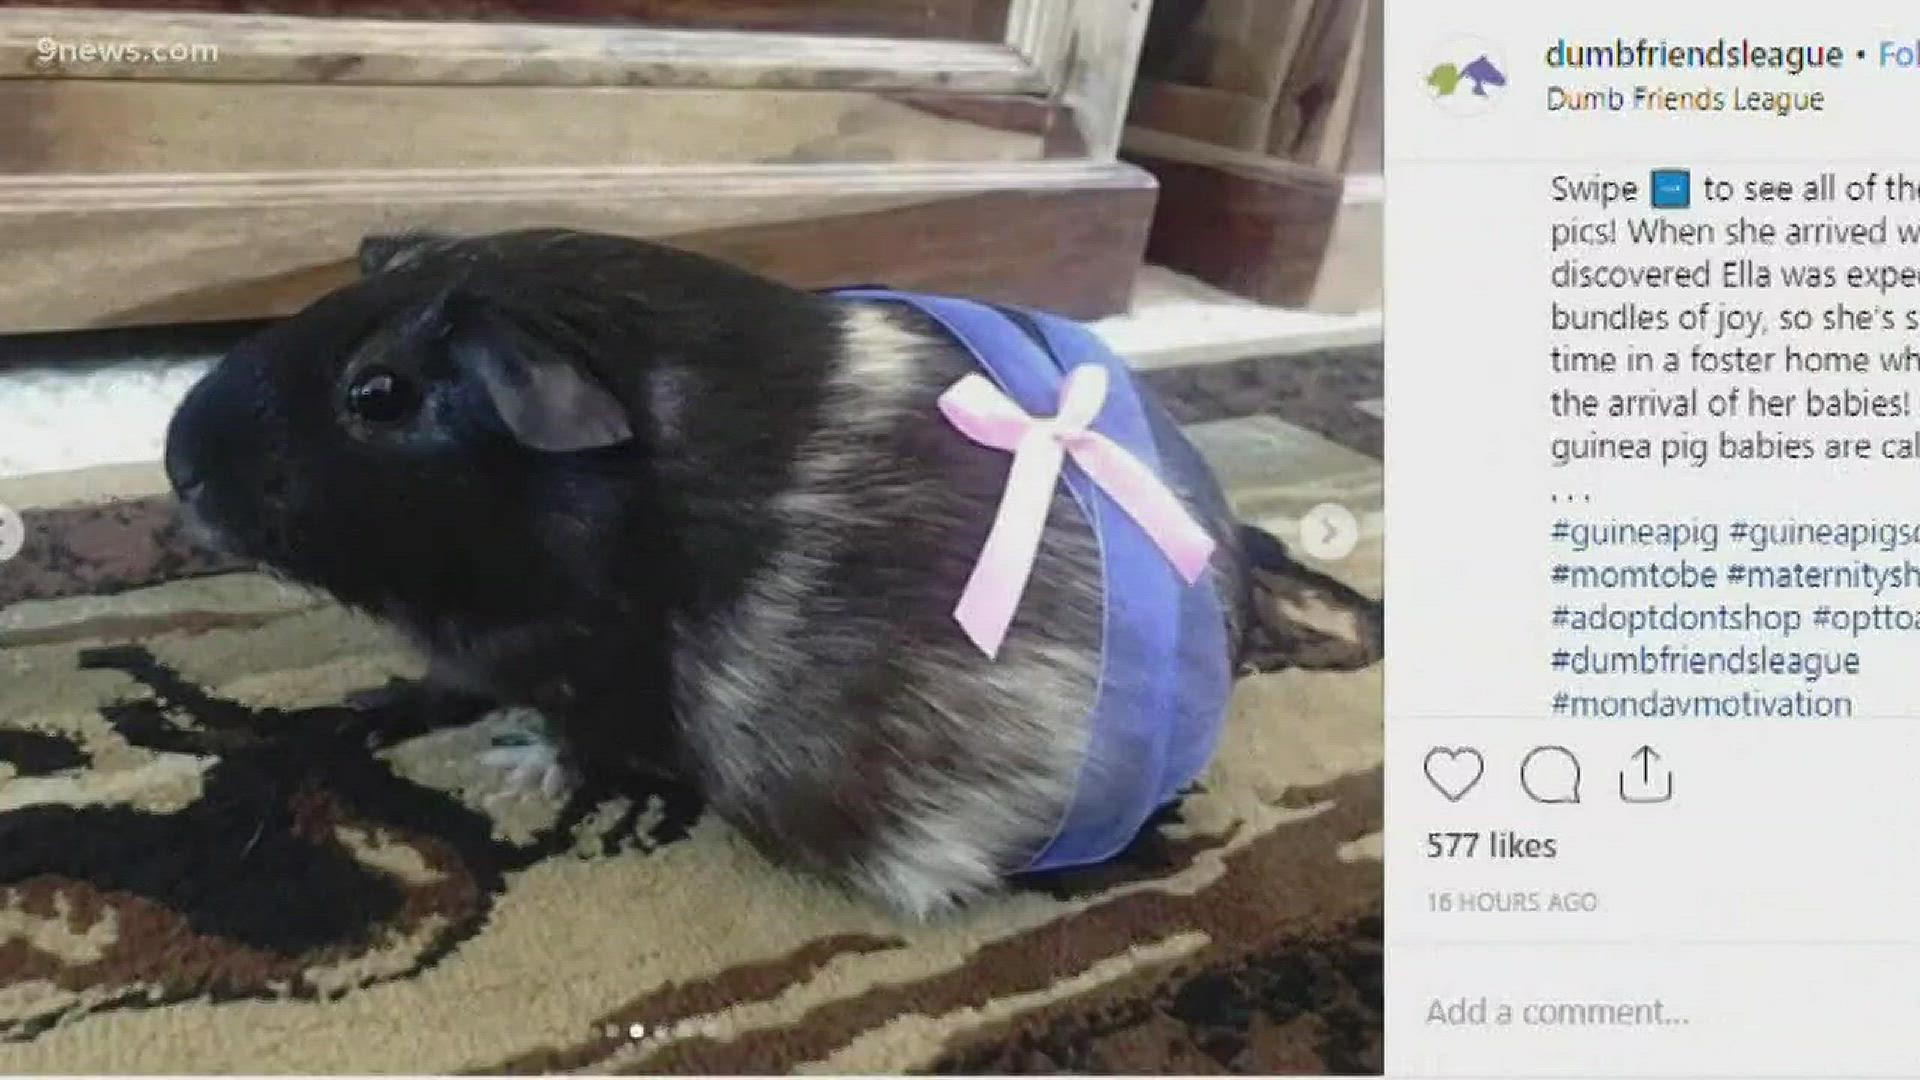 The Dumb Friends Leauge recently featured a pregnant guinea pig in a very adorable instagram post.